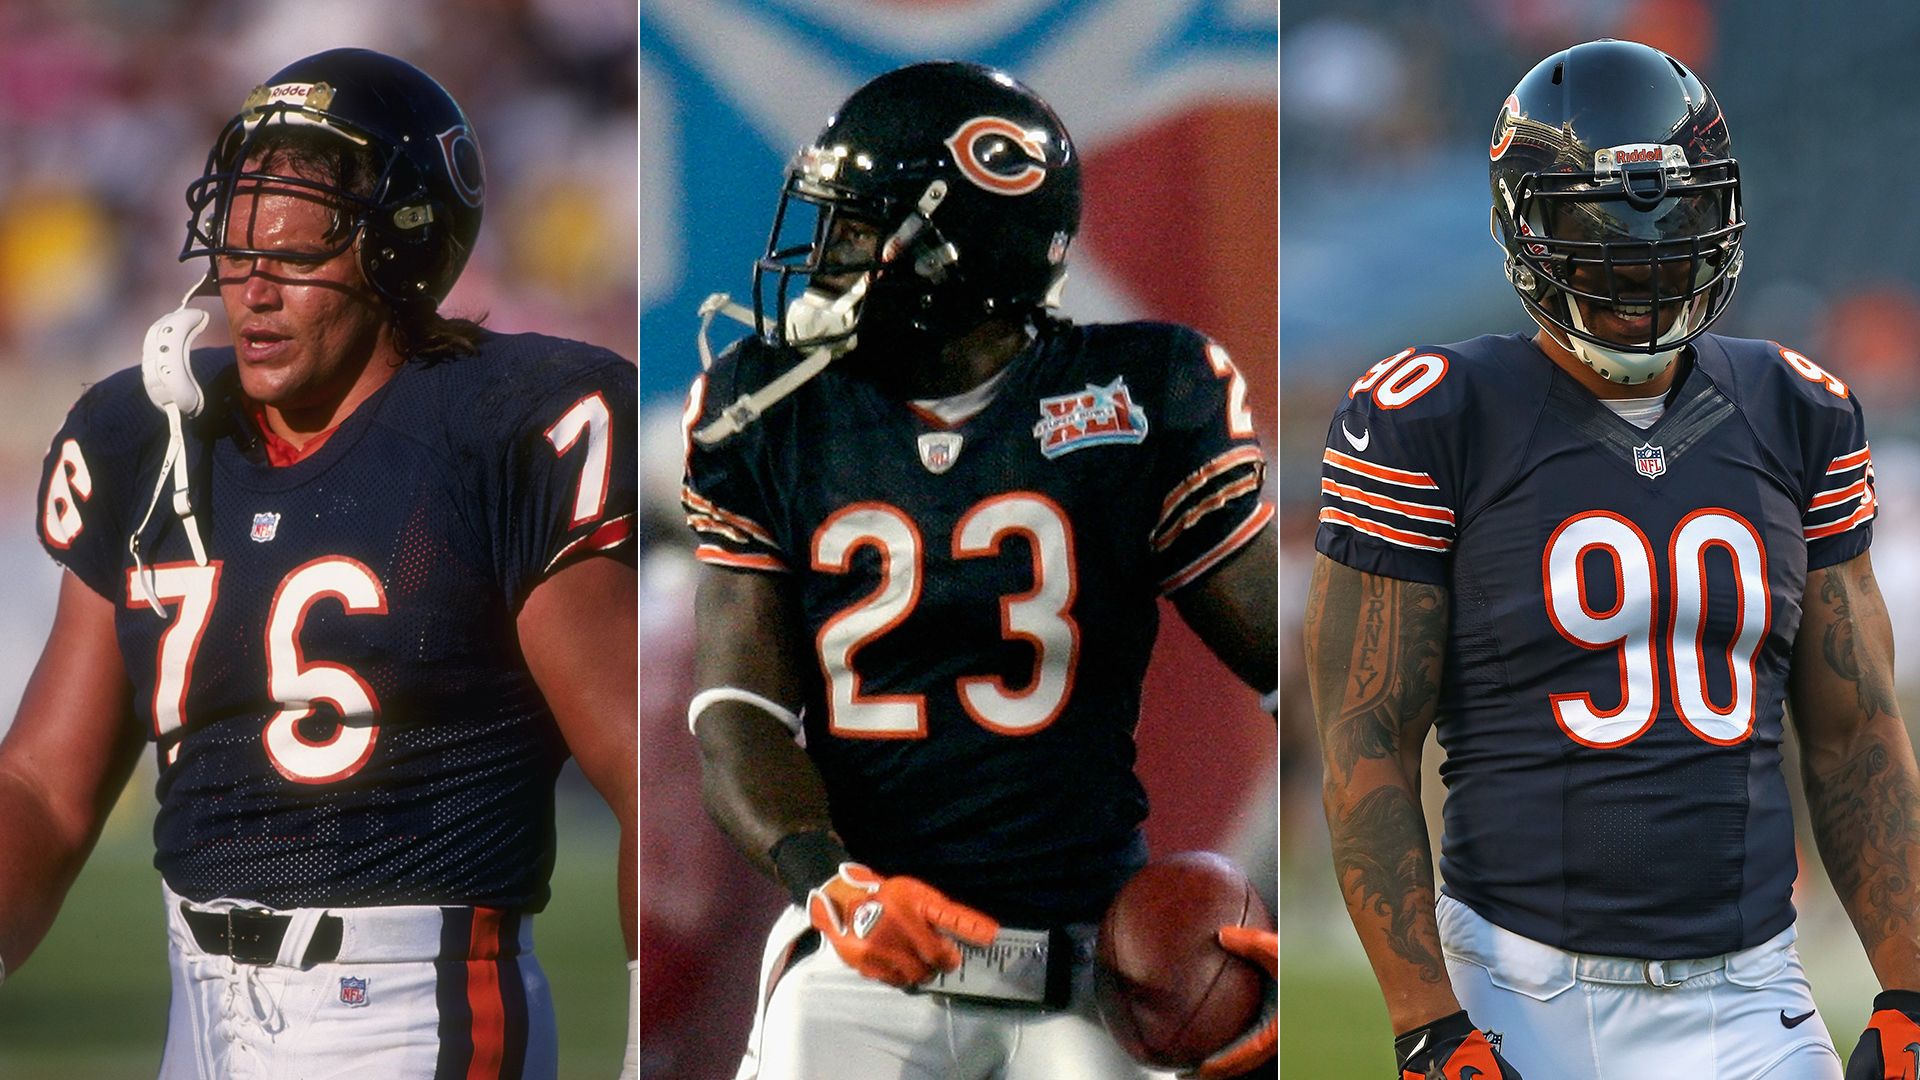 Three side-by-side photos of Bears players Steve McMichael (L), Devin Hester and Julius Peppers in uniform.